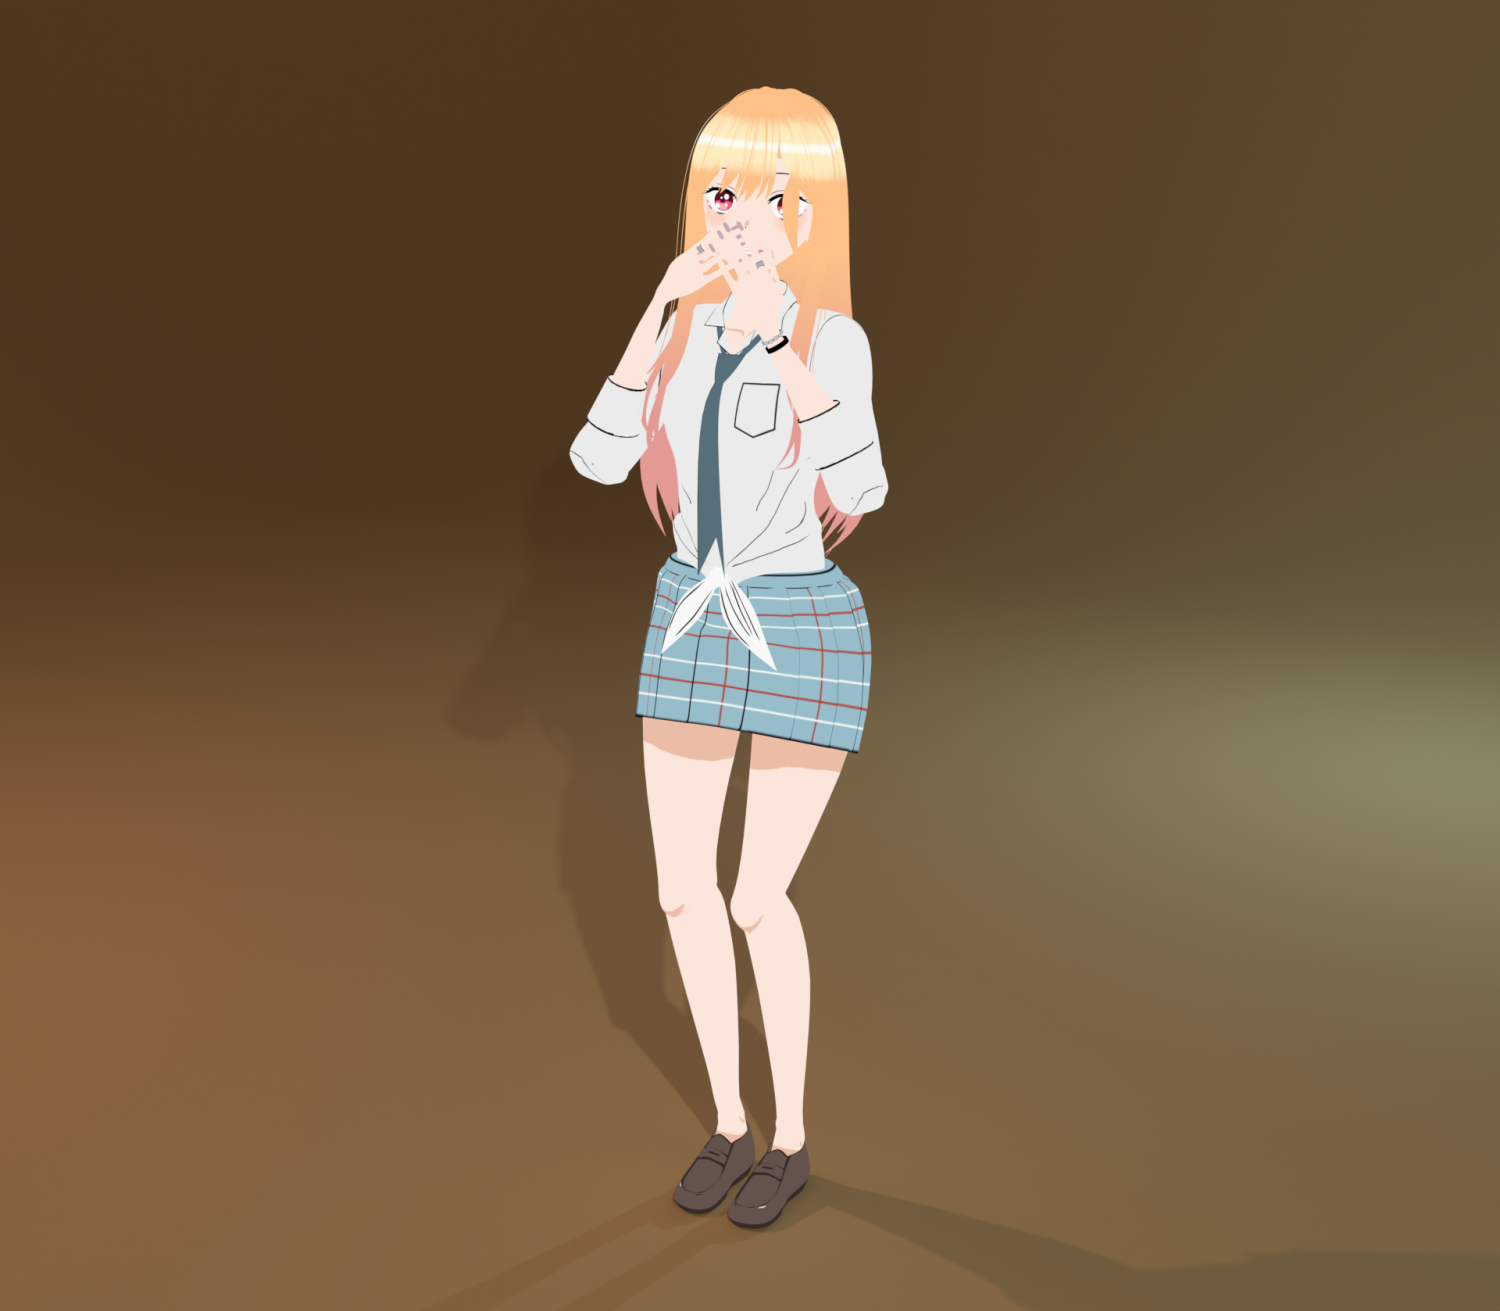 Anime Vermeil in Gold Character Low-poly Low-poly Modelo 3D